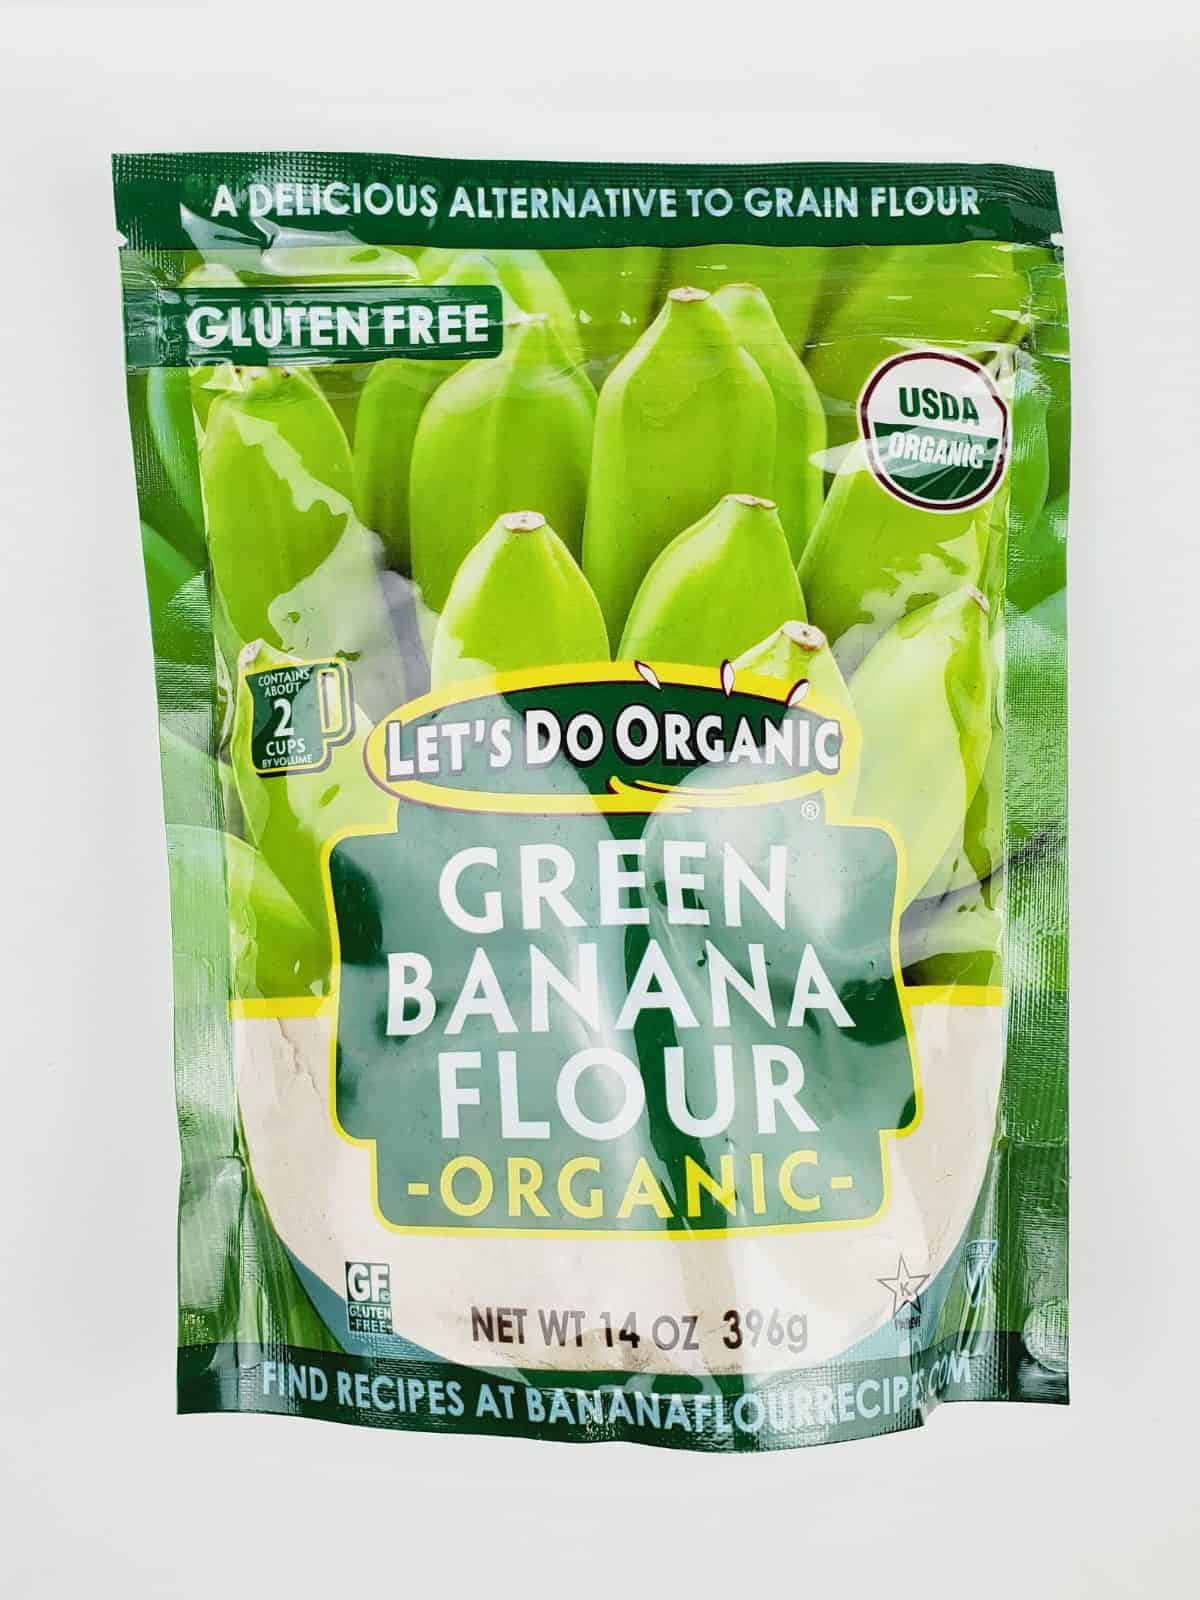 a pack of 14 oz. of green banana flour from Let's Do Organic.